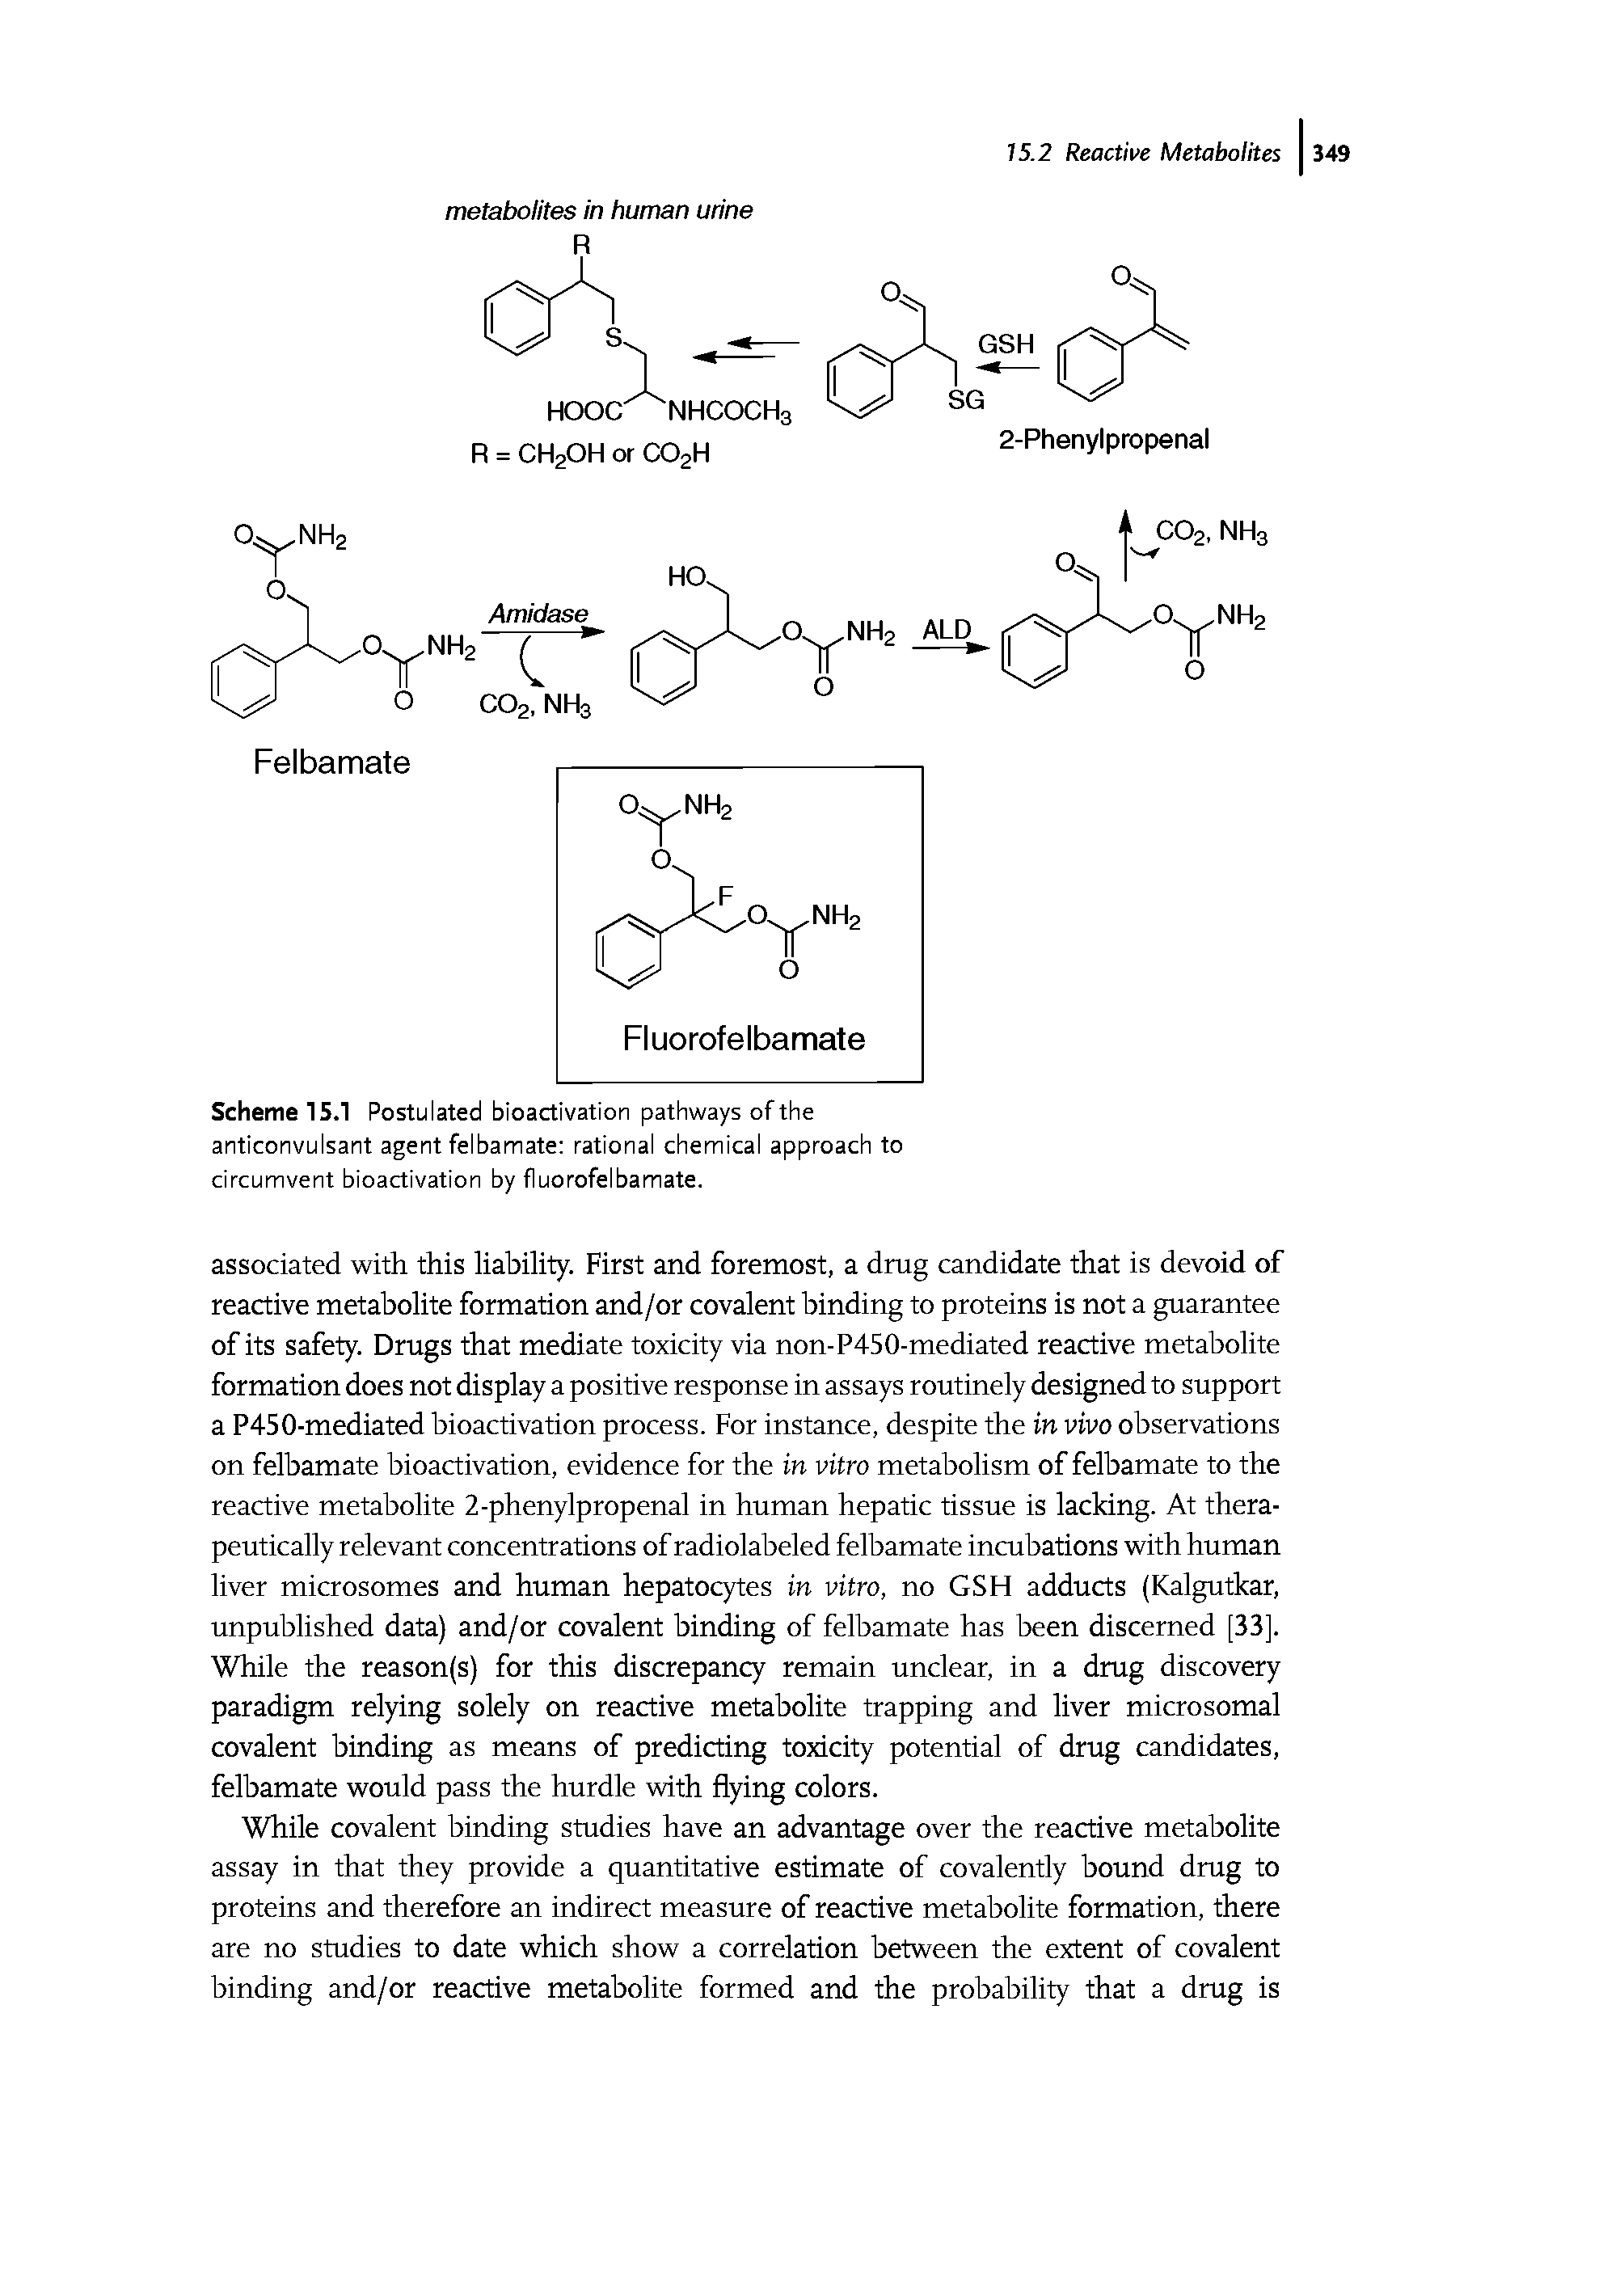 Scheme 15.1 Postulated bioactivation pathways of the anticonvulsant agent felbamate rational chemical approach to circumvent bioactivation by fluorofelbamate.